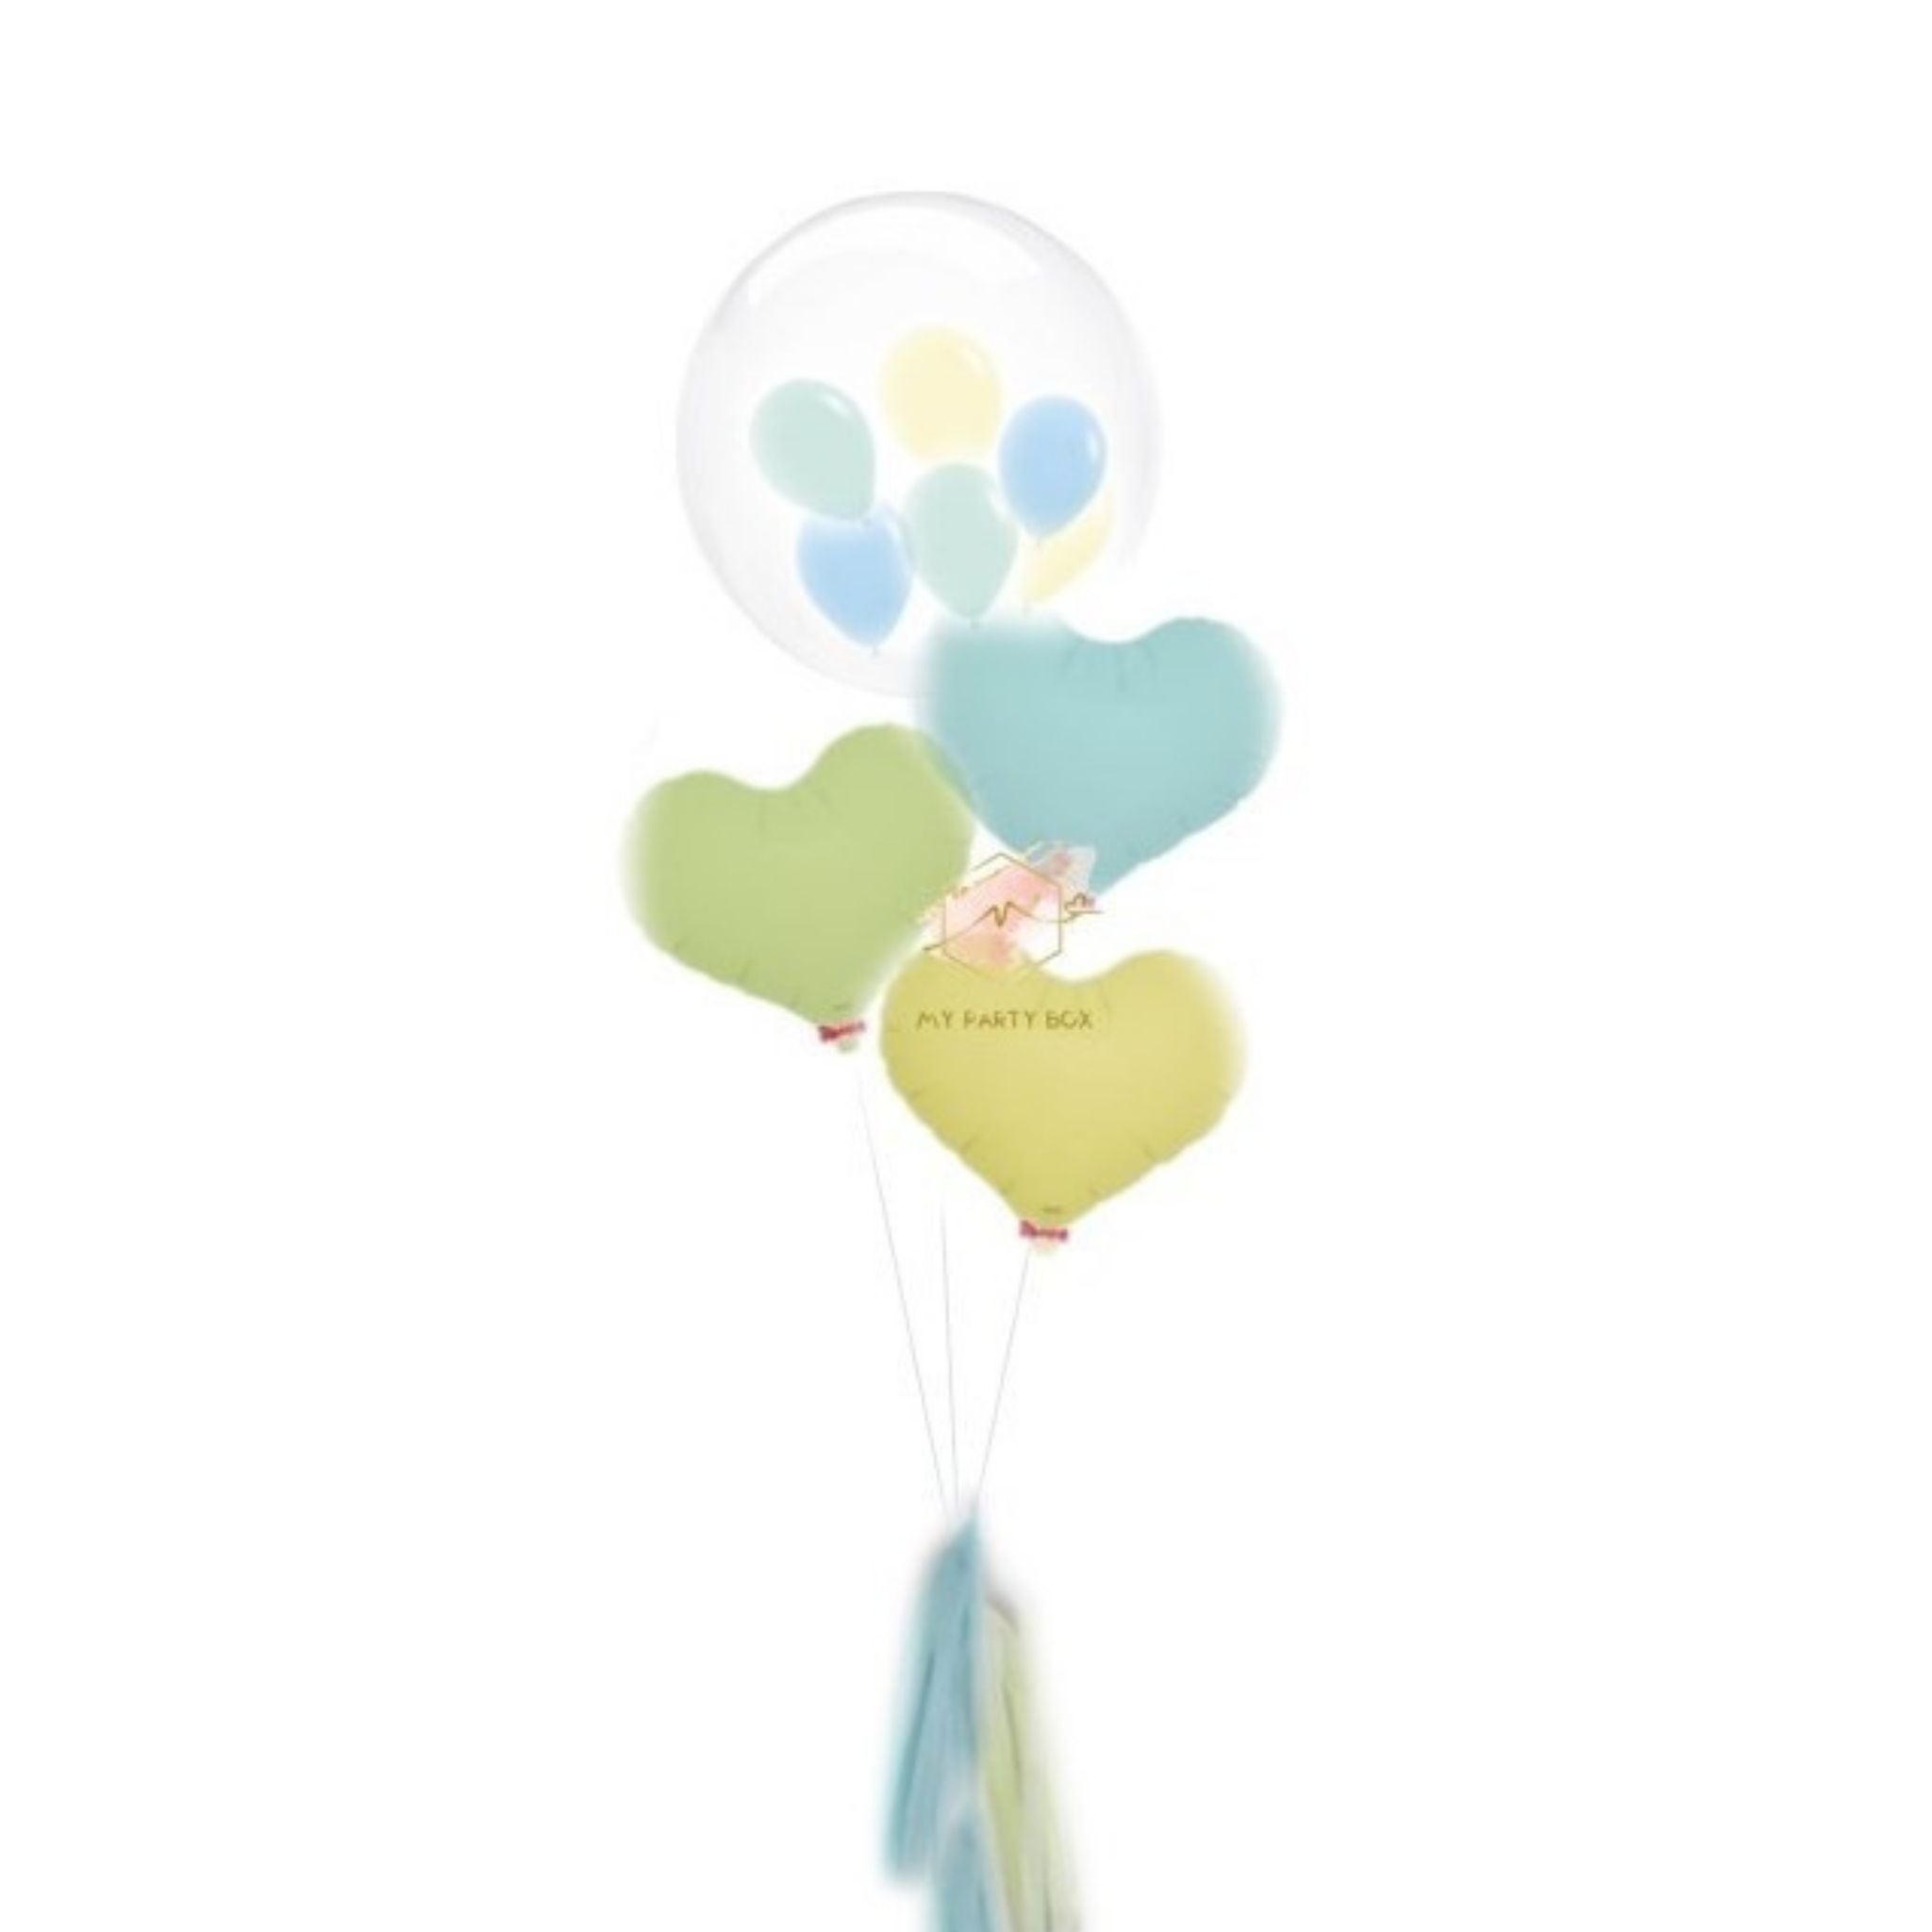 My Party Box Bubble Gum Balloon Bouquet with one bubble balloon with mini latex balloon inside and one pastel blue foil heart balloon, one Pastel green foil heart balloon and one pastel yellow  Heart Balloon